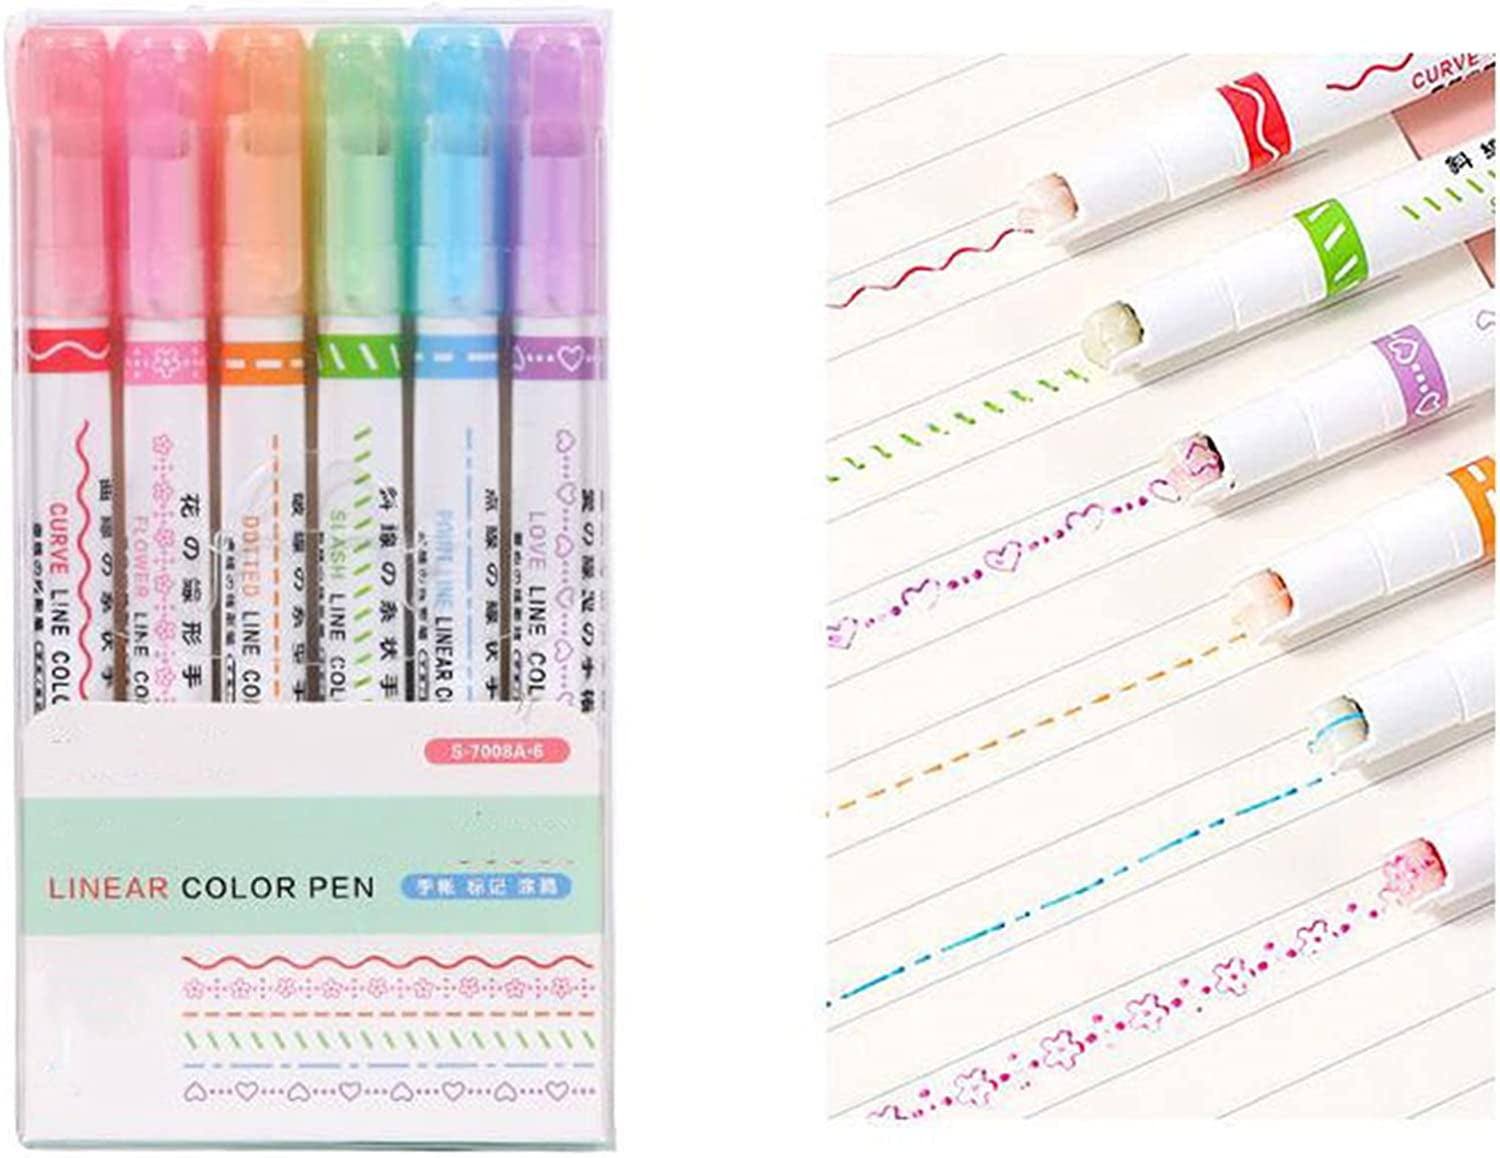 Curve Highlighter Pen Set Twelve Constellation Colored Curve Pens,12 Pcs  Dual Tip Markers Pens,Cool Pens for Teenage Kids Writing Journaling,  Drawing